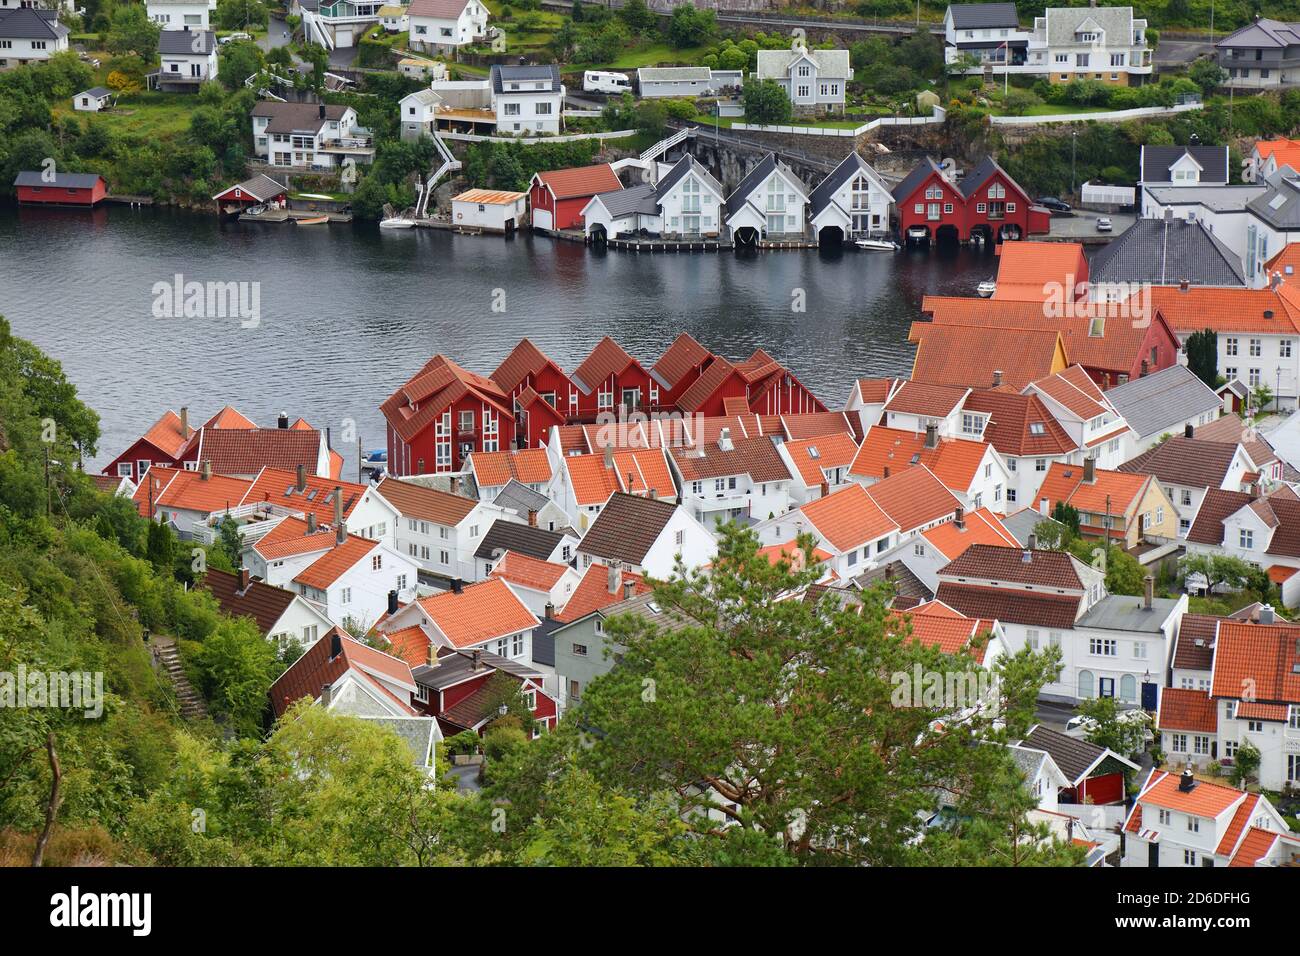 Flekkefjord harbor town in Vest-Agder county of Norway Stock Photo - Alamy